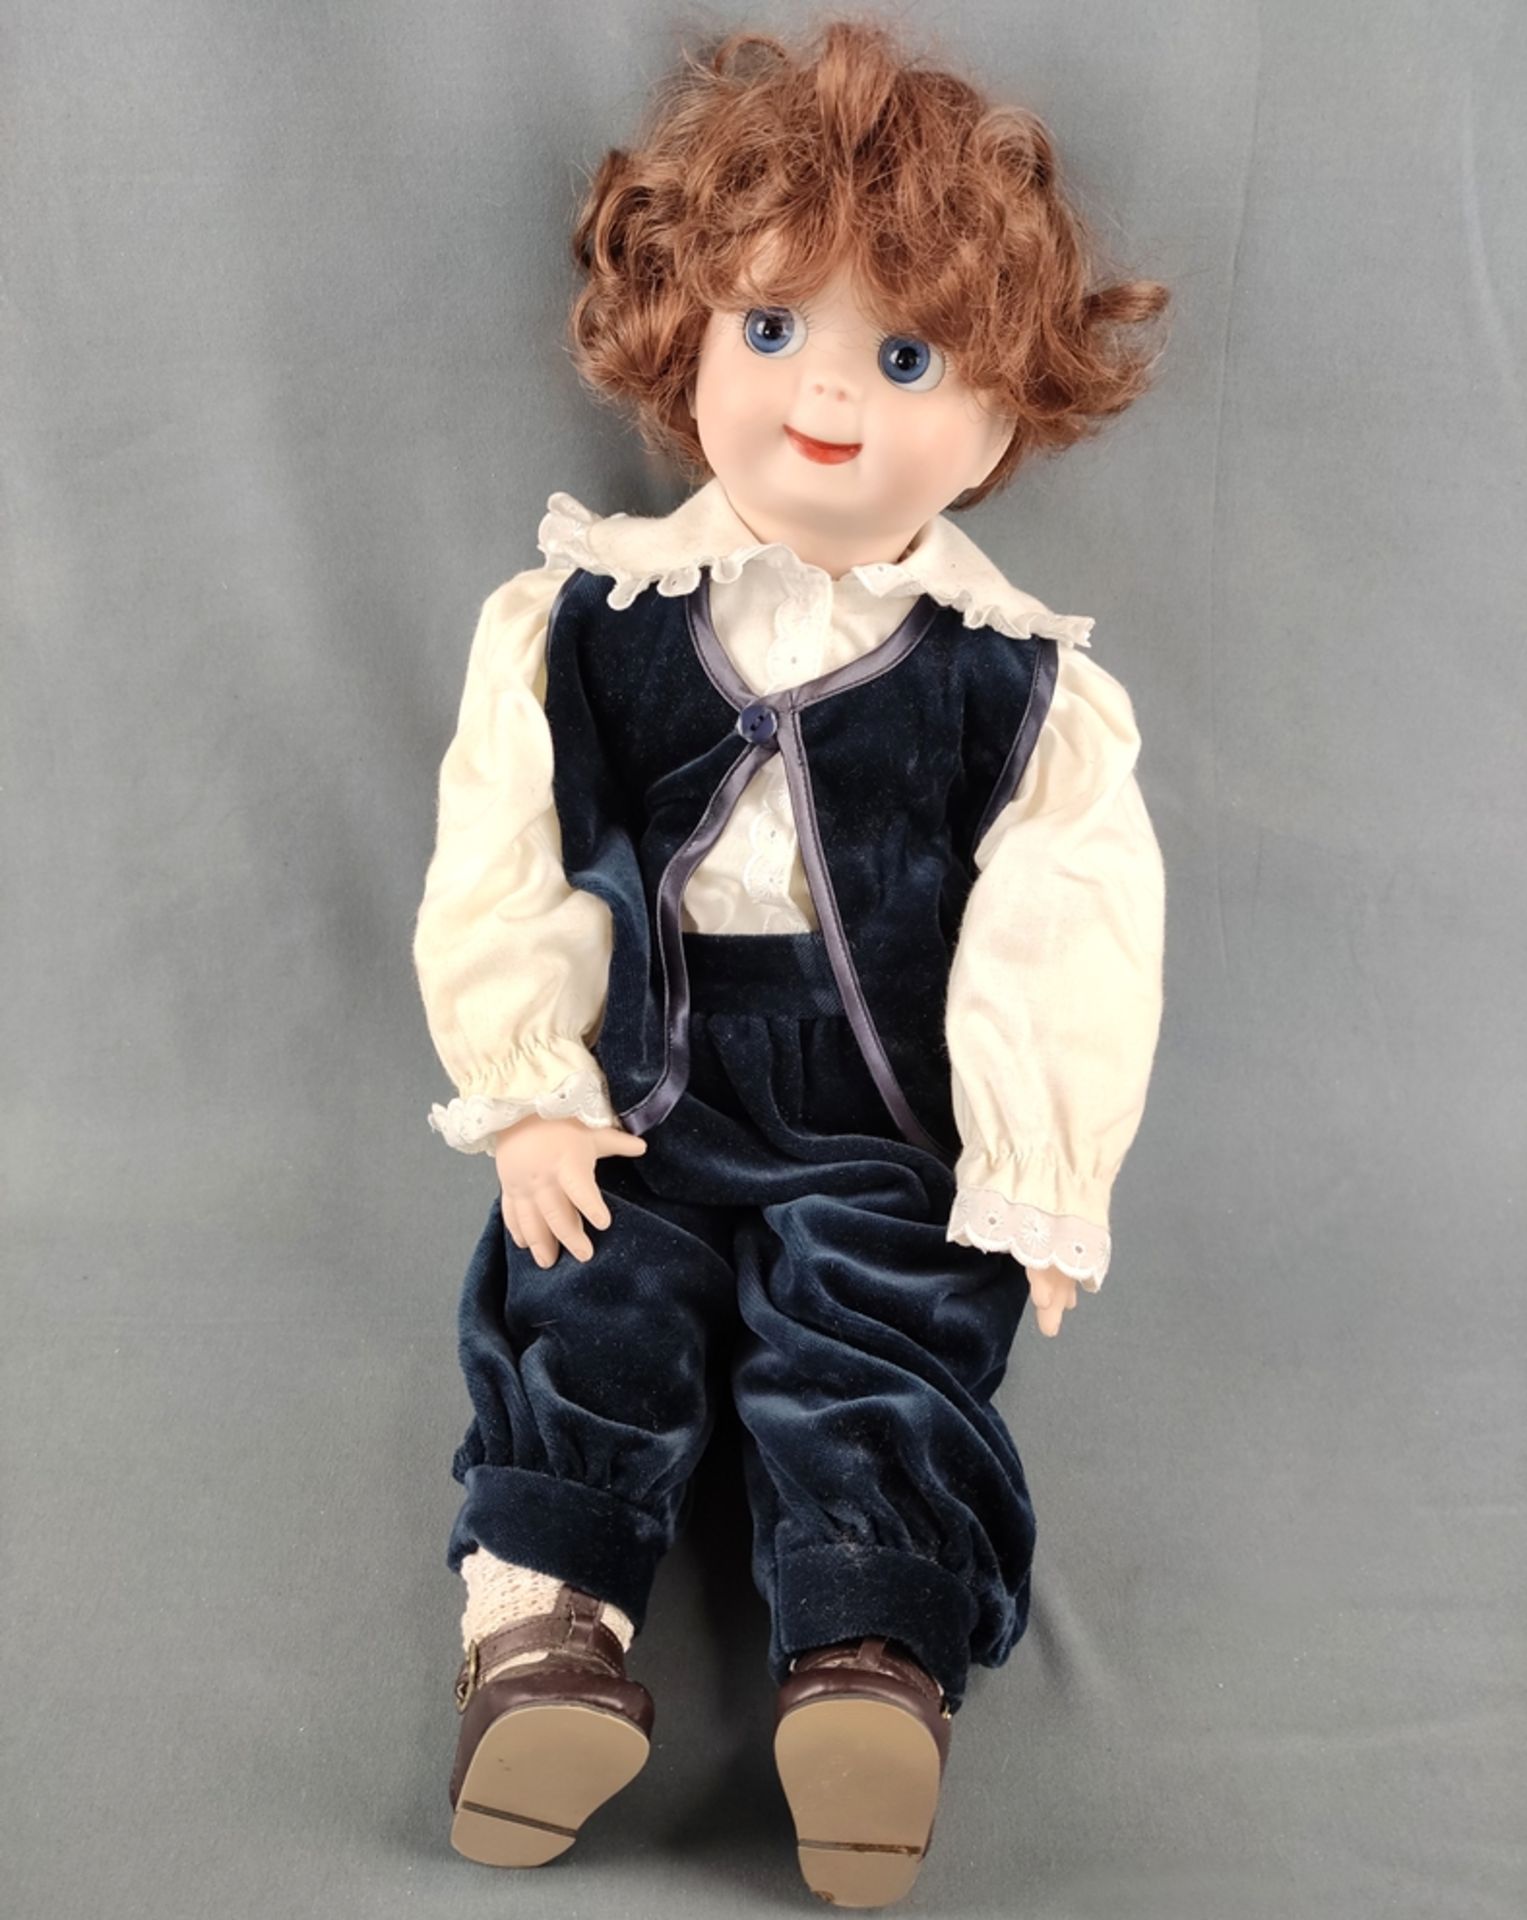 Doll "Googlie" by J.D. Kestner, with big blue eyes and closed melon mouth, brown curly wig and stra